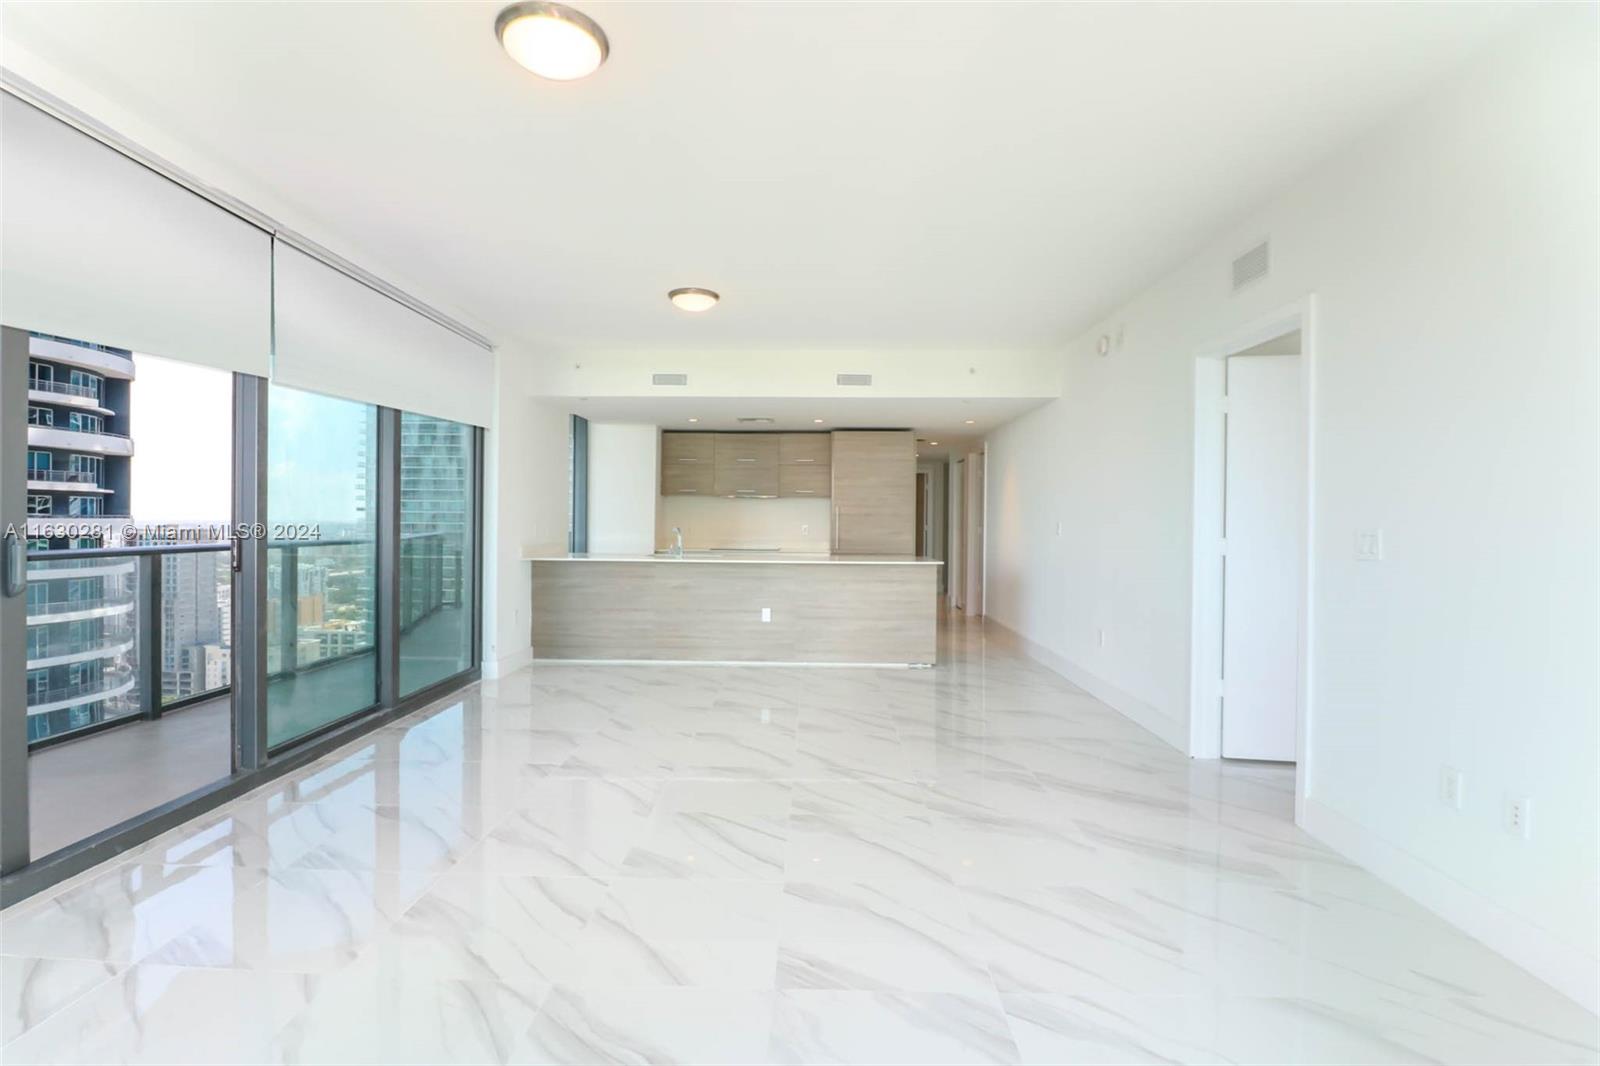 Enjoy Living on this LUXURY lifestyle CORNER 3Beds/2Baths/1HalfBaath condo with BREATHTAKING VIEWS from Intracoastal and Miami Skyline. Get to see the beautiful Miami SUNRISE and SUNSET everyday from the wraparound balcony. This unit has a spacious floor plan with lots of natural light with windows from floor to ceiling. LUXURIOUS FINISHES and APPLIANCES. The SLS Brickell Building offers 5-STAR AMENITIES such as: 2 pools, Fitness Center, Billiard, Theater Party Room and many more